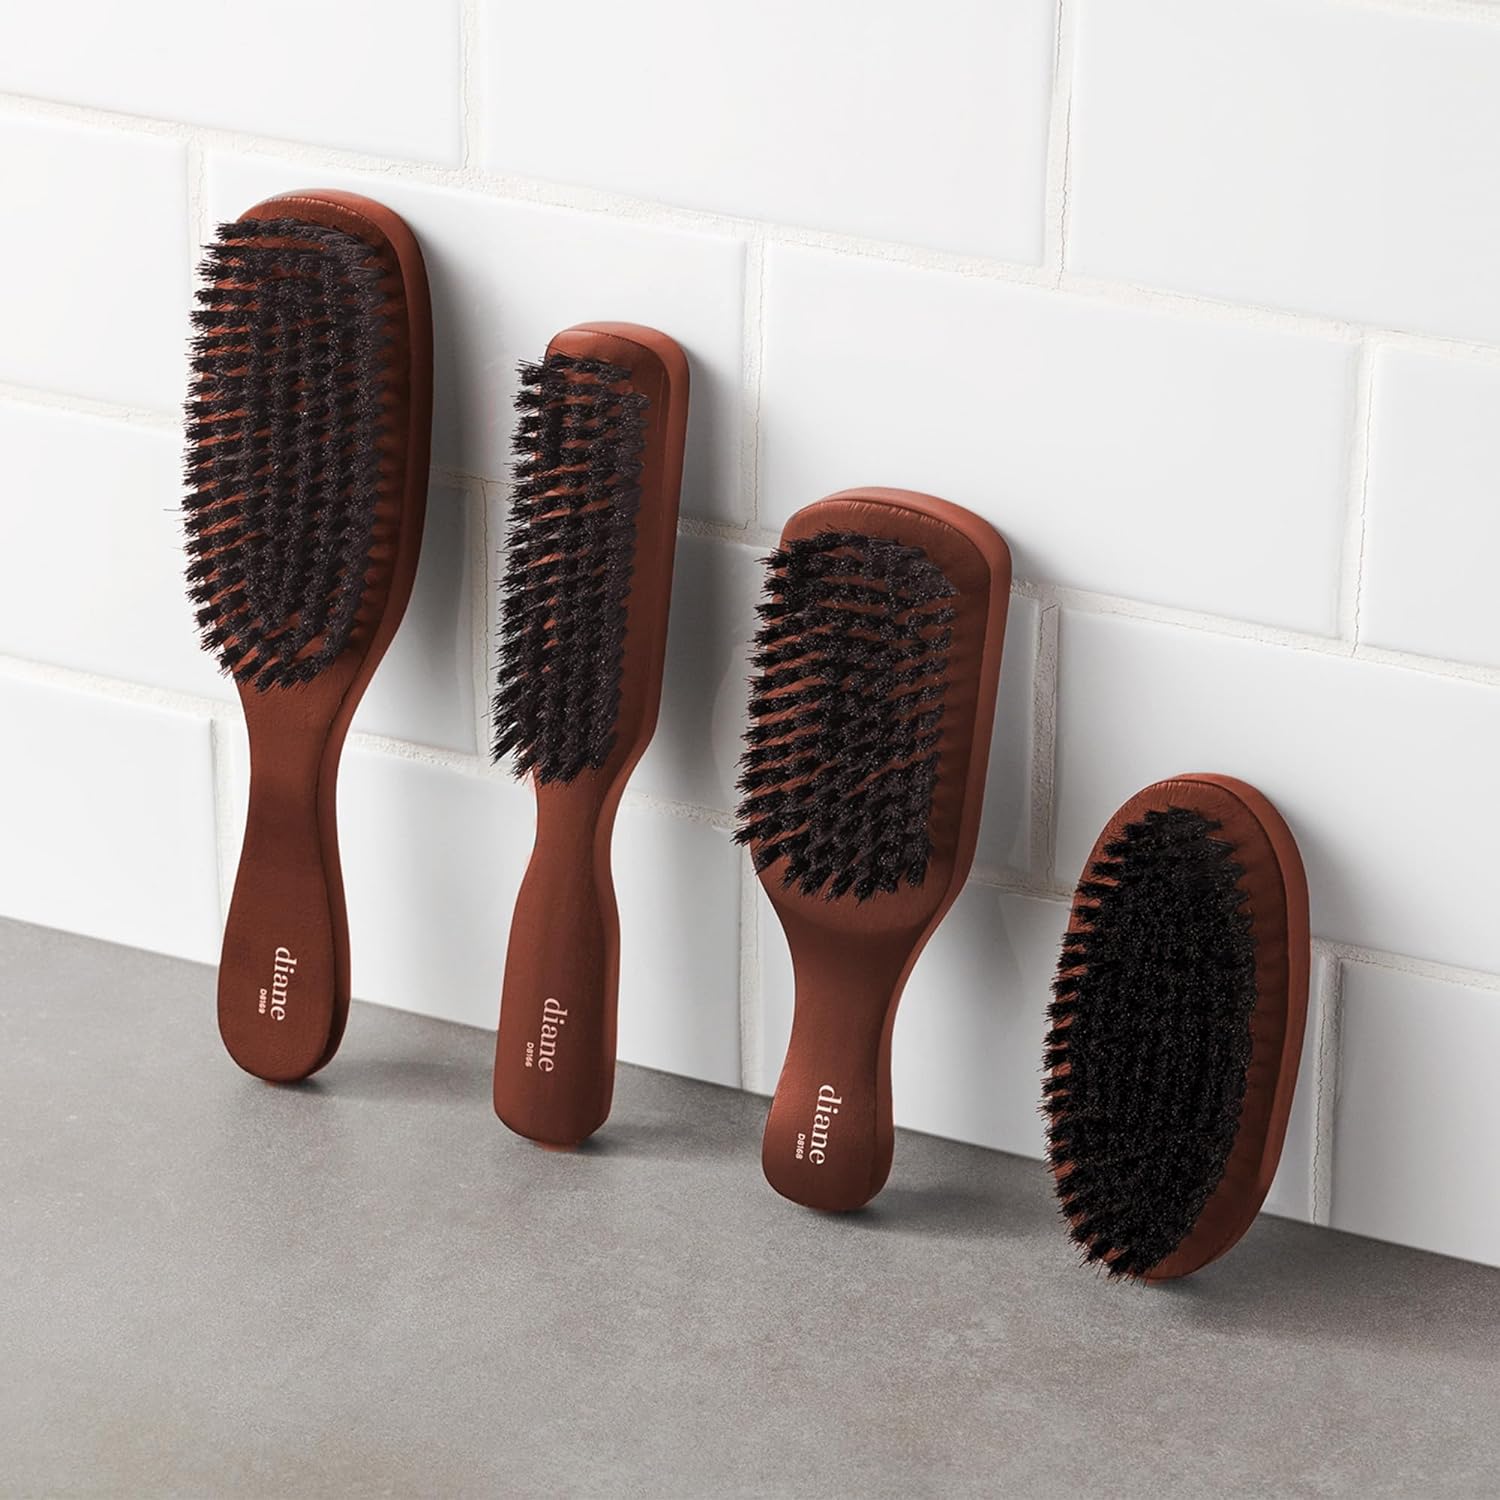 Diane Reinforced Boar Bristle Club Wave Brush for Men and Barbers – Medium Bristles for Thick and Curly Hair – Use for Detangling, Smoothing, Wave Styles, Restore Shine and Texture : Beauty & Personal Care